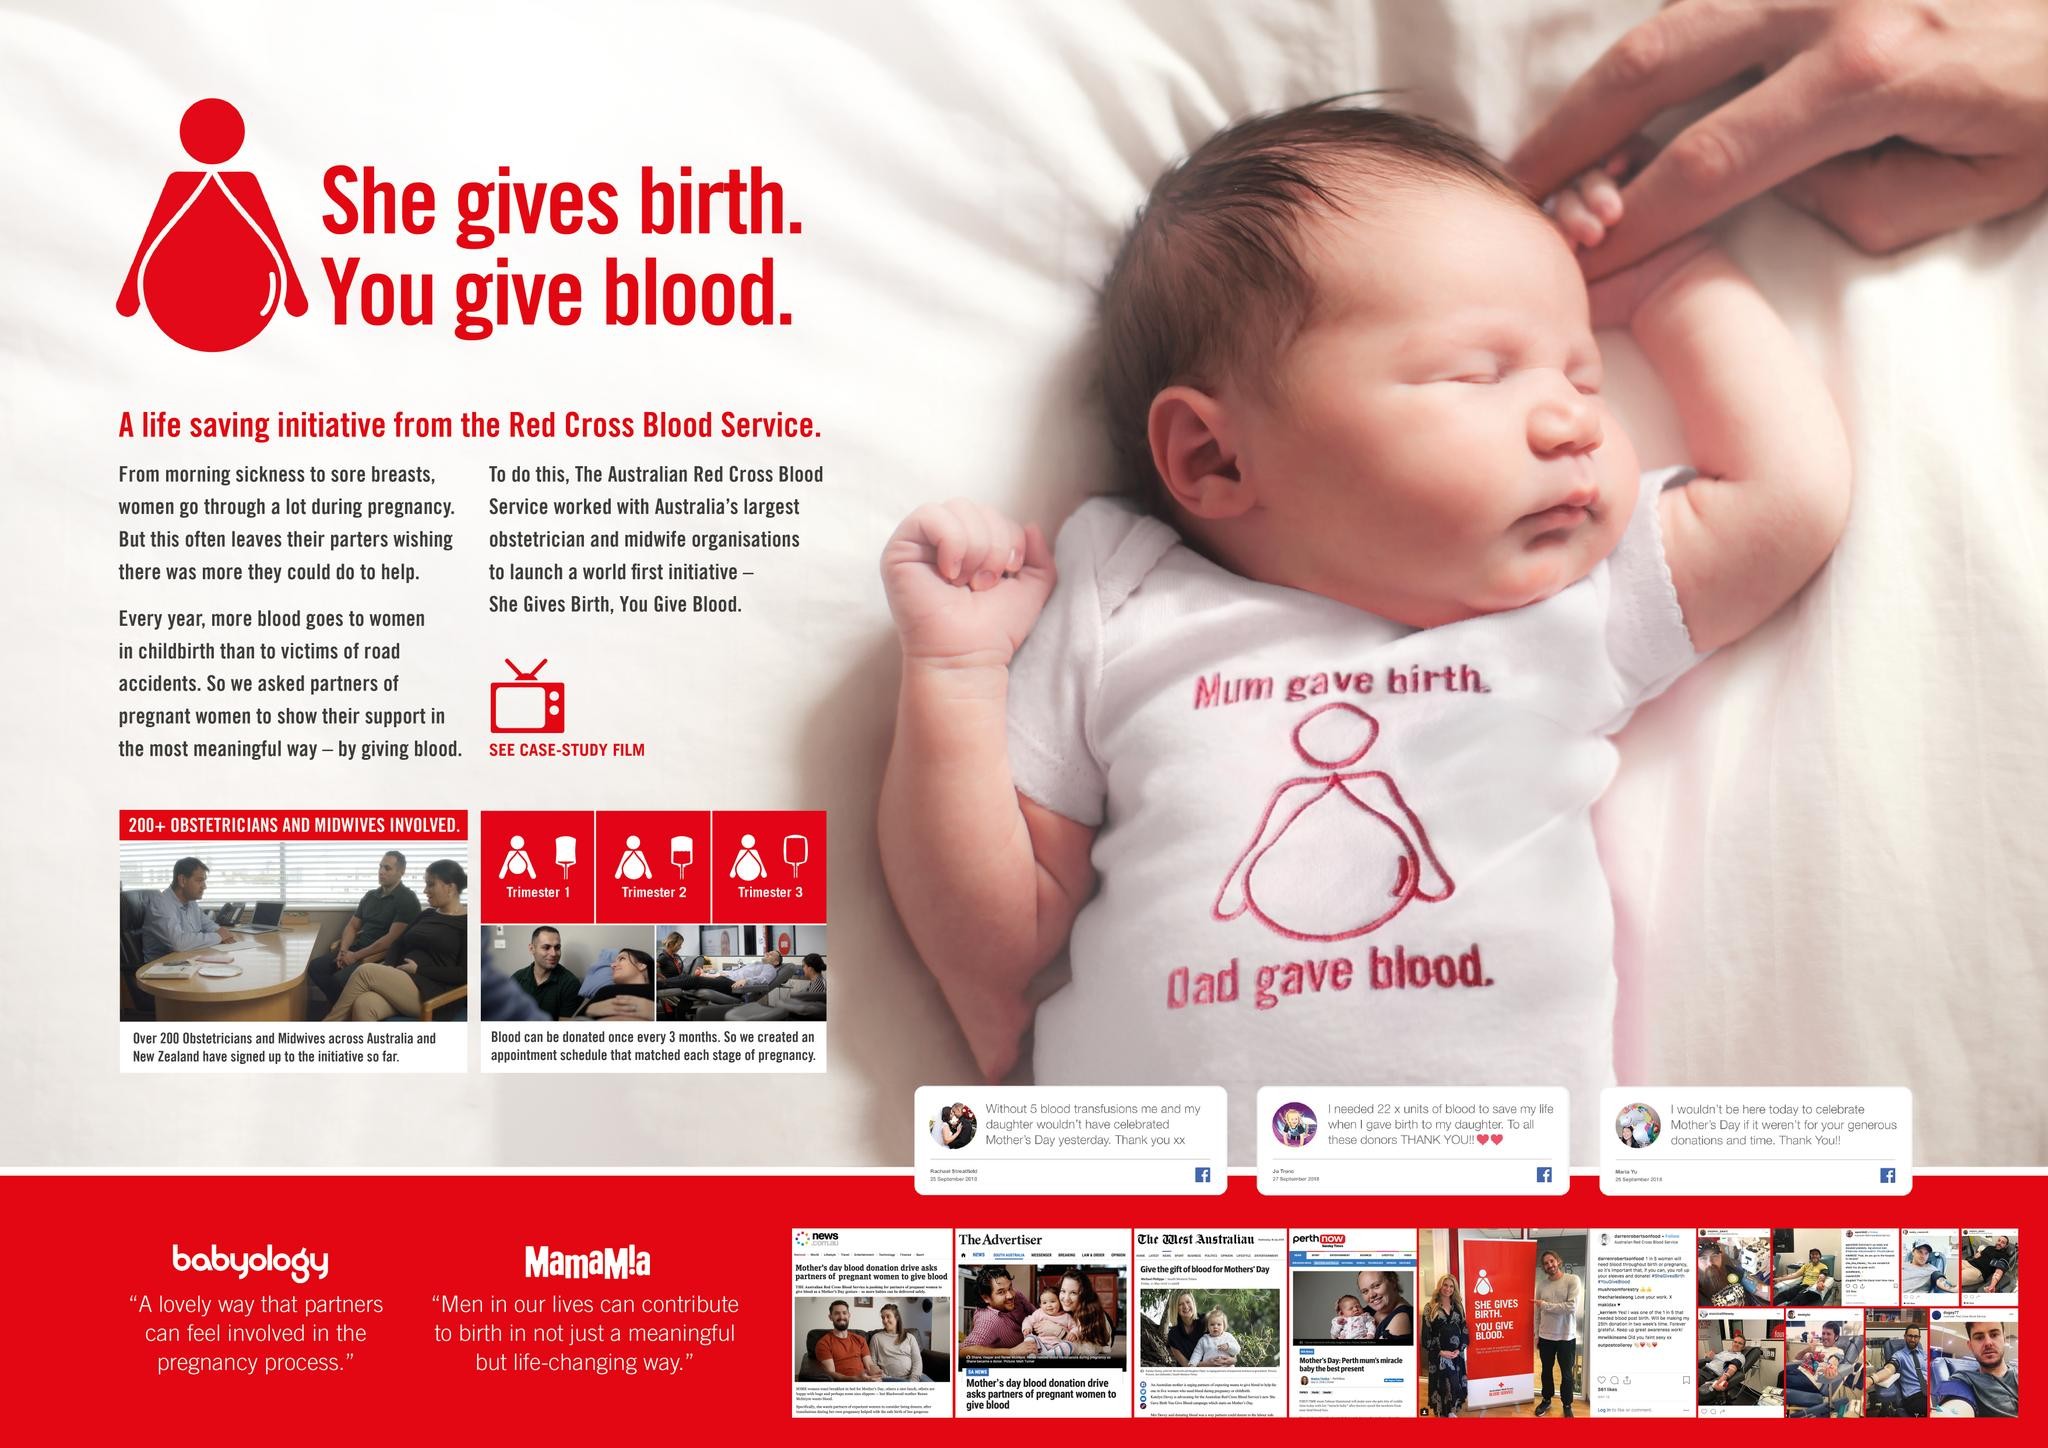 SHE GIVES BIRTH, YOU GIVE BLOOD